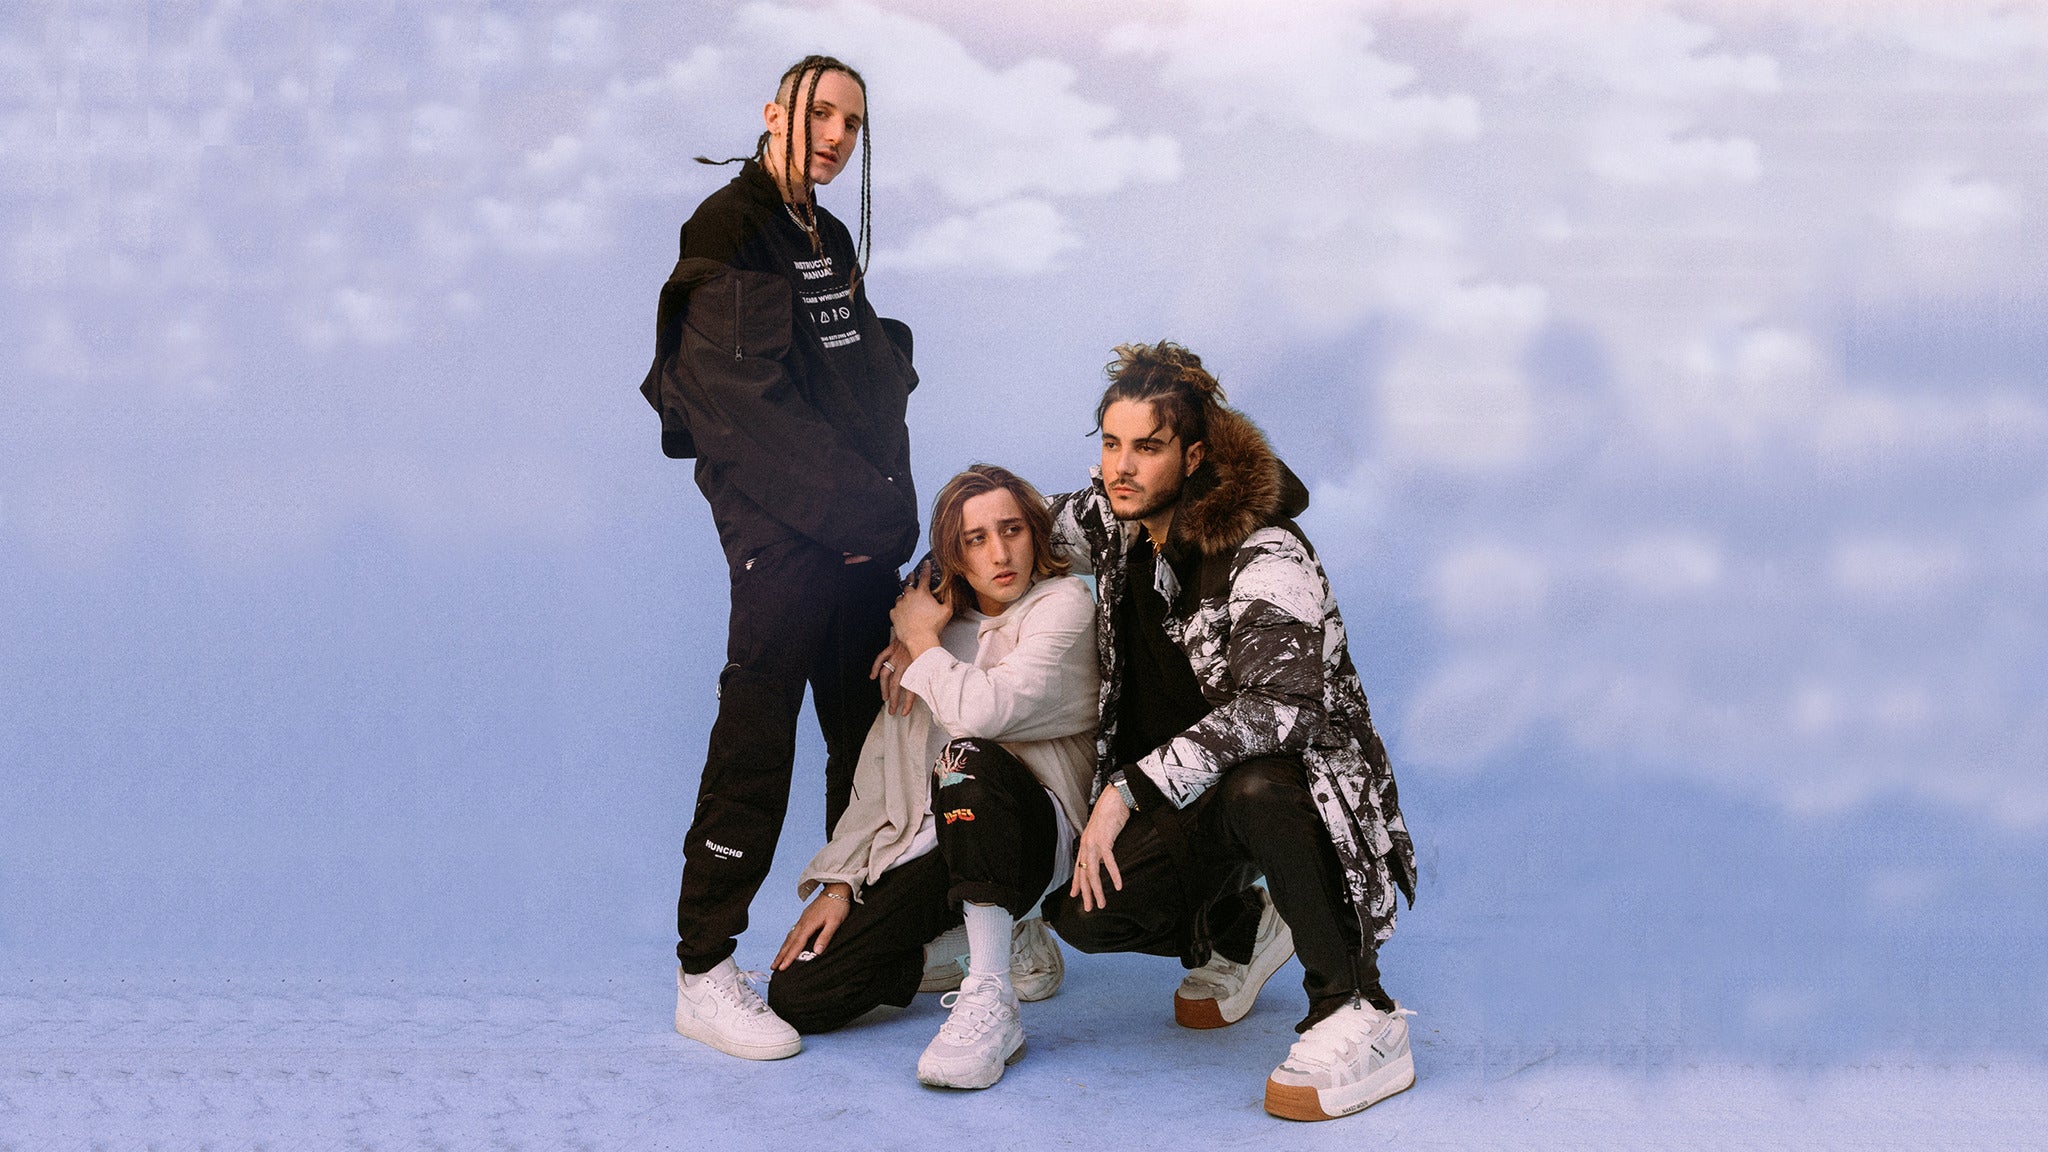 Image used with permission from Ticketmaster | Chase Atlantic tickets